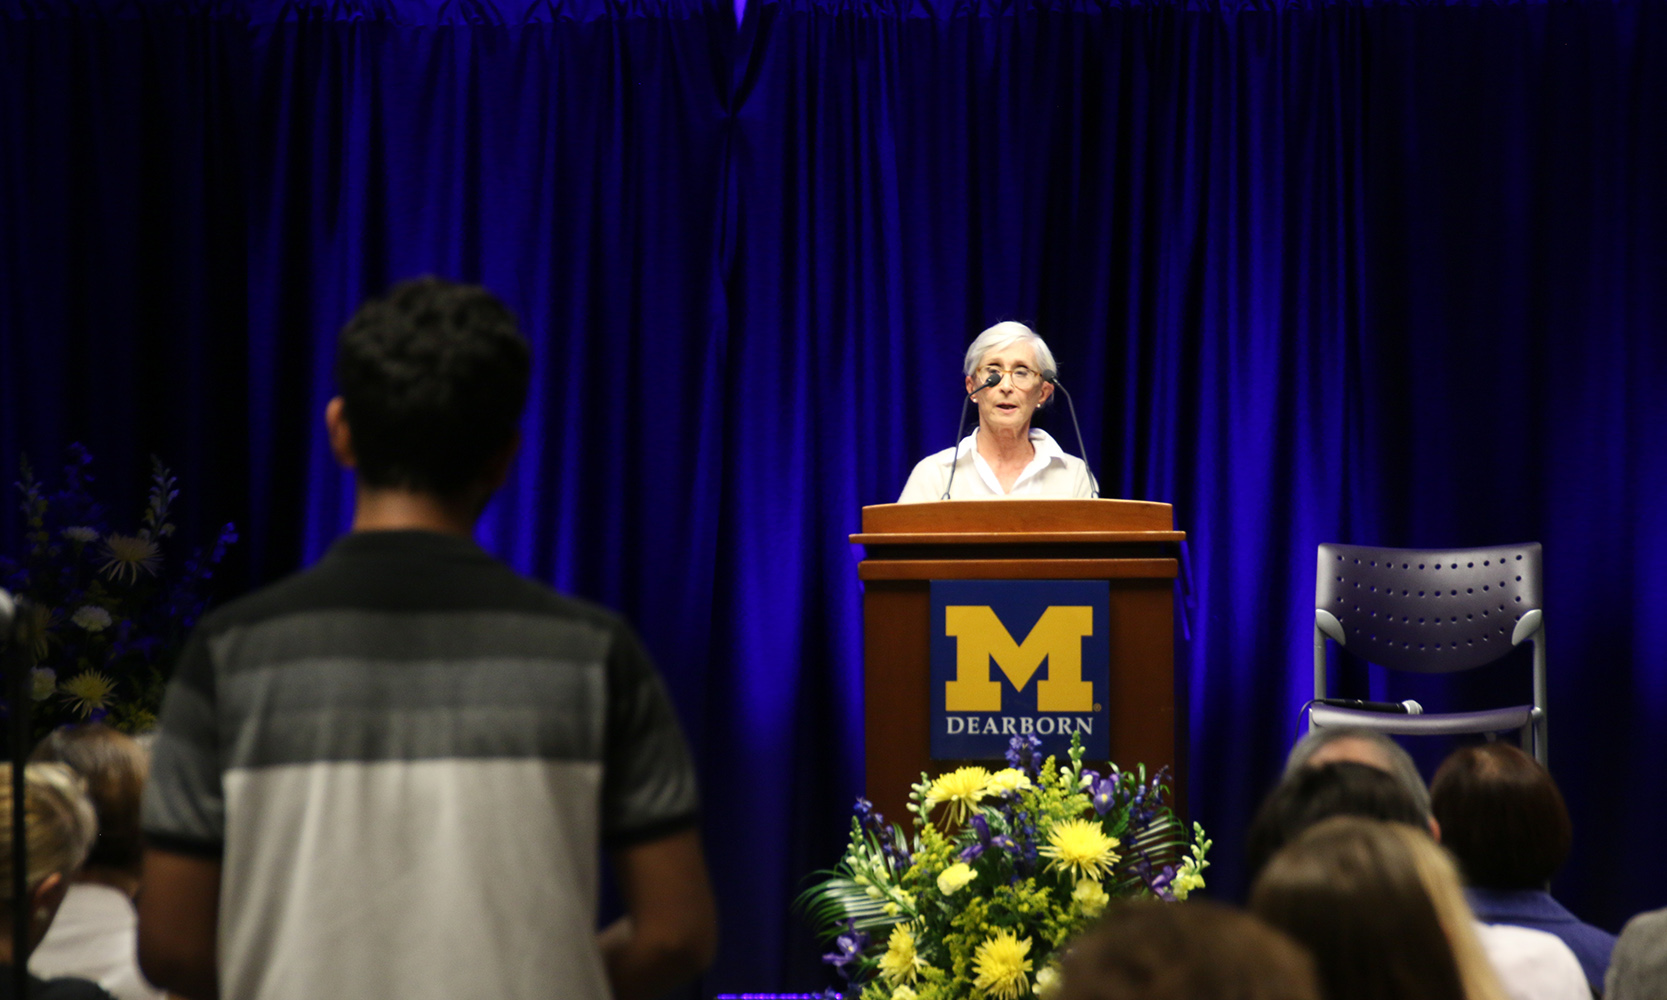 Twyla Tharp speaking to a group at the Talent Gateway from behind a podium